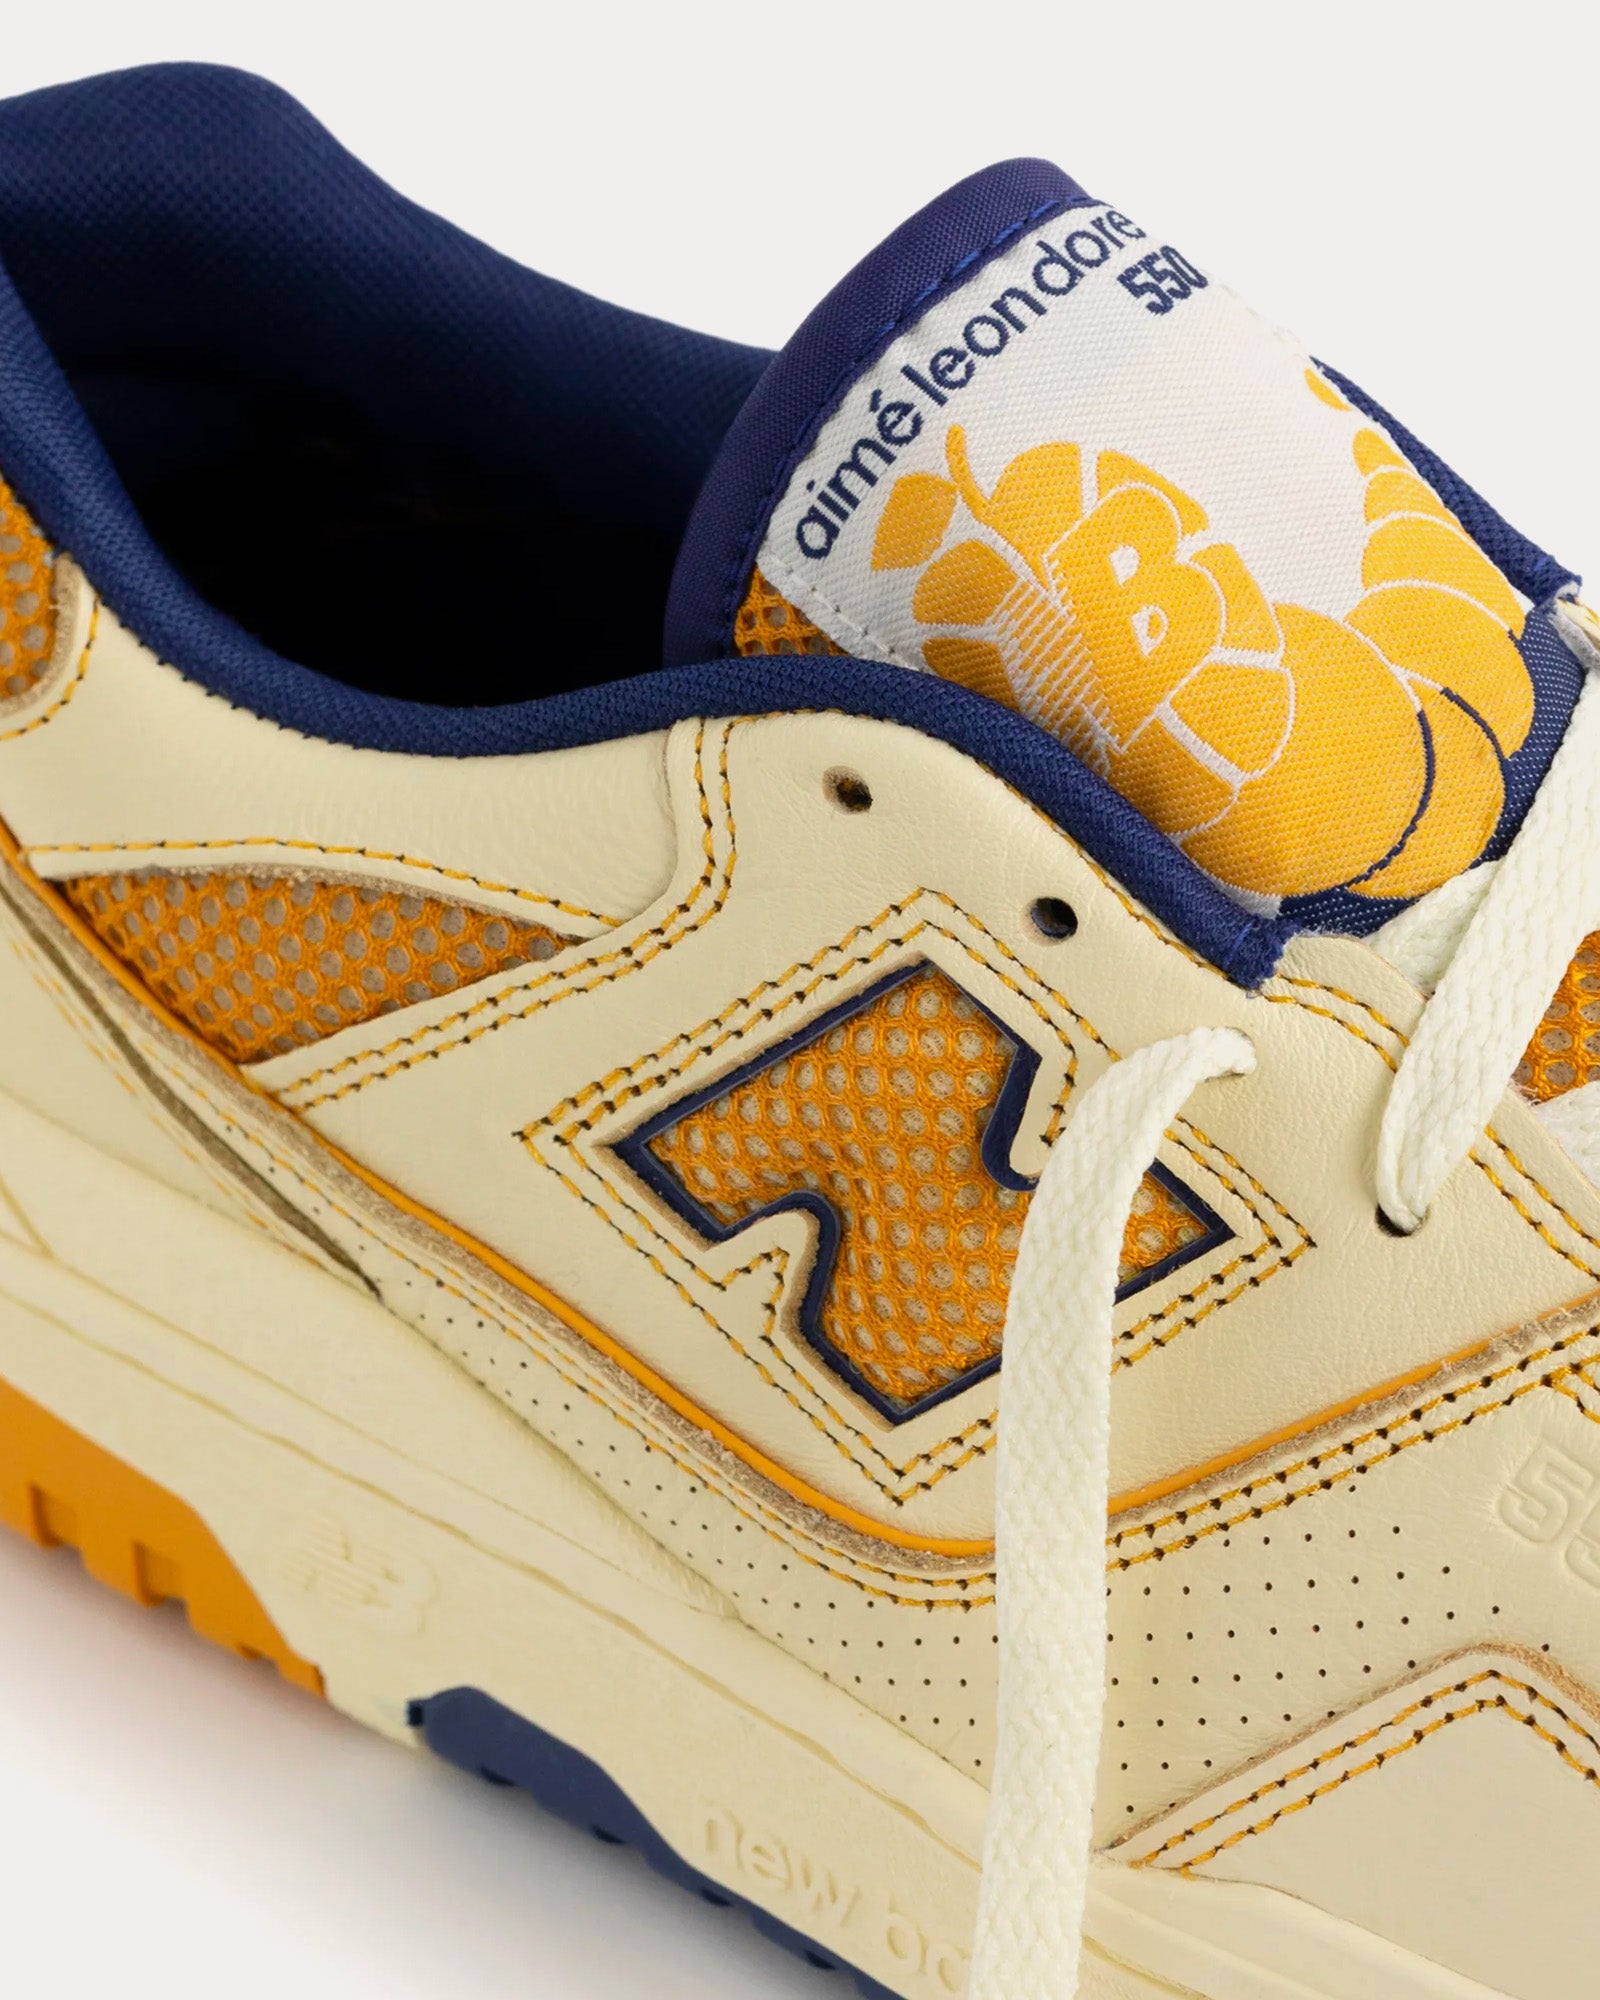 New Balance x Aime Leon Dore - P550 Basketball Oxfords Yellow / Blue Low Top Sneakers